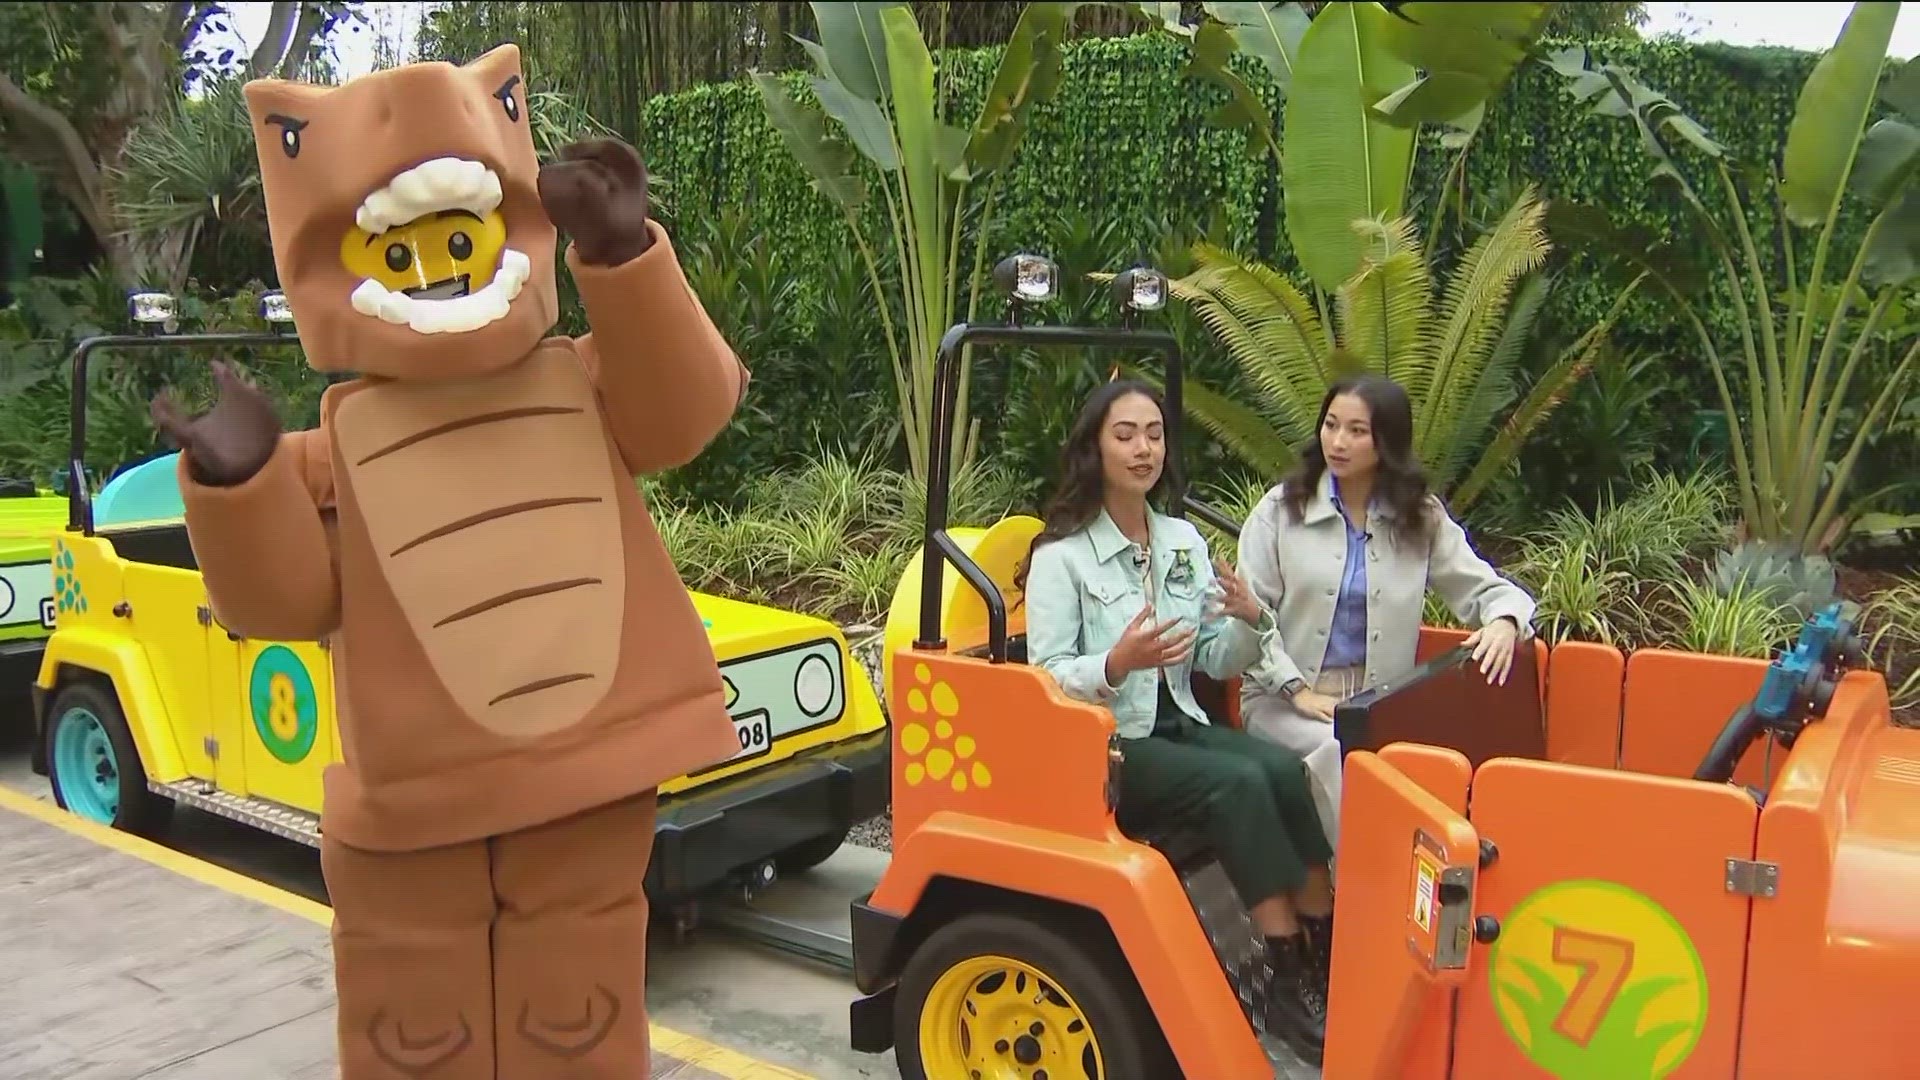 CBS 8 tours Dino Valley, where dinosaurs come to life at LEGOLAND. This NEW land is filled with dino-packed fun designed for dino fans of all ages! www.legoland.com